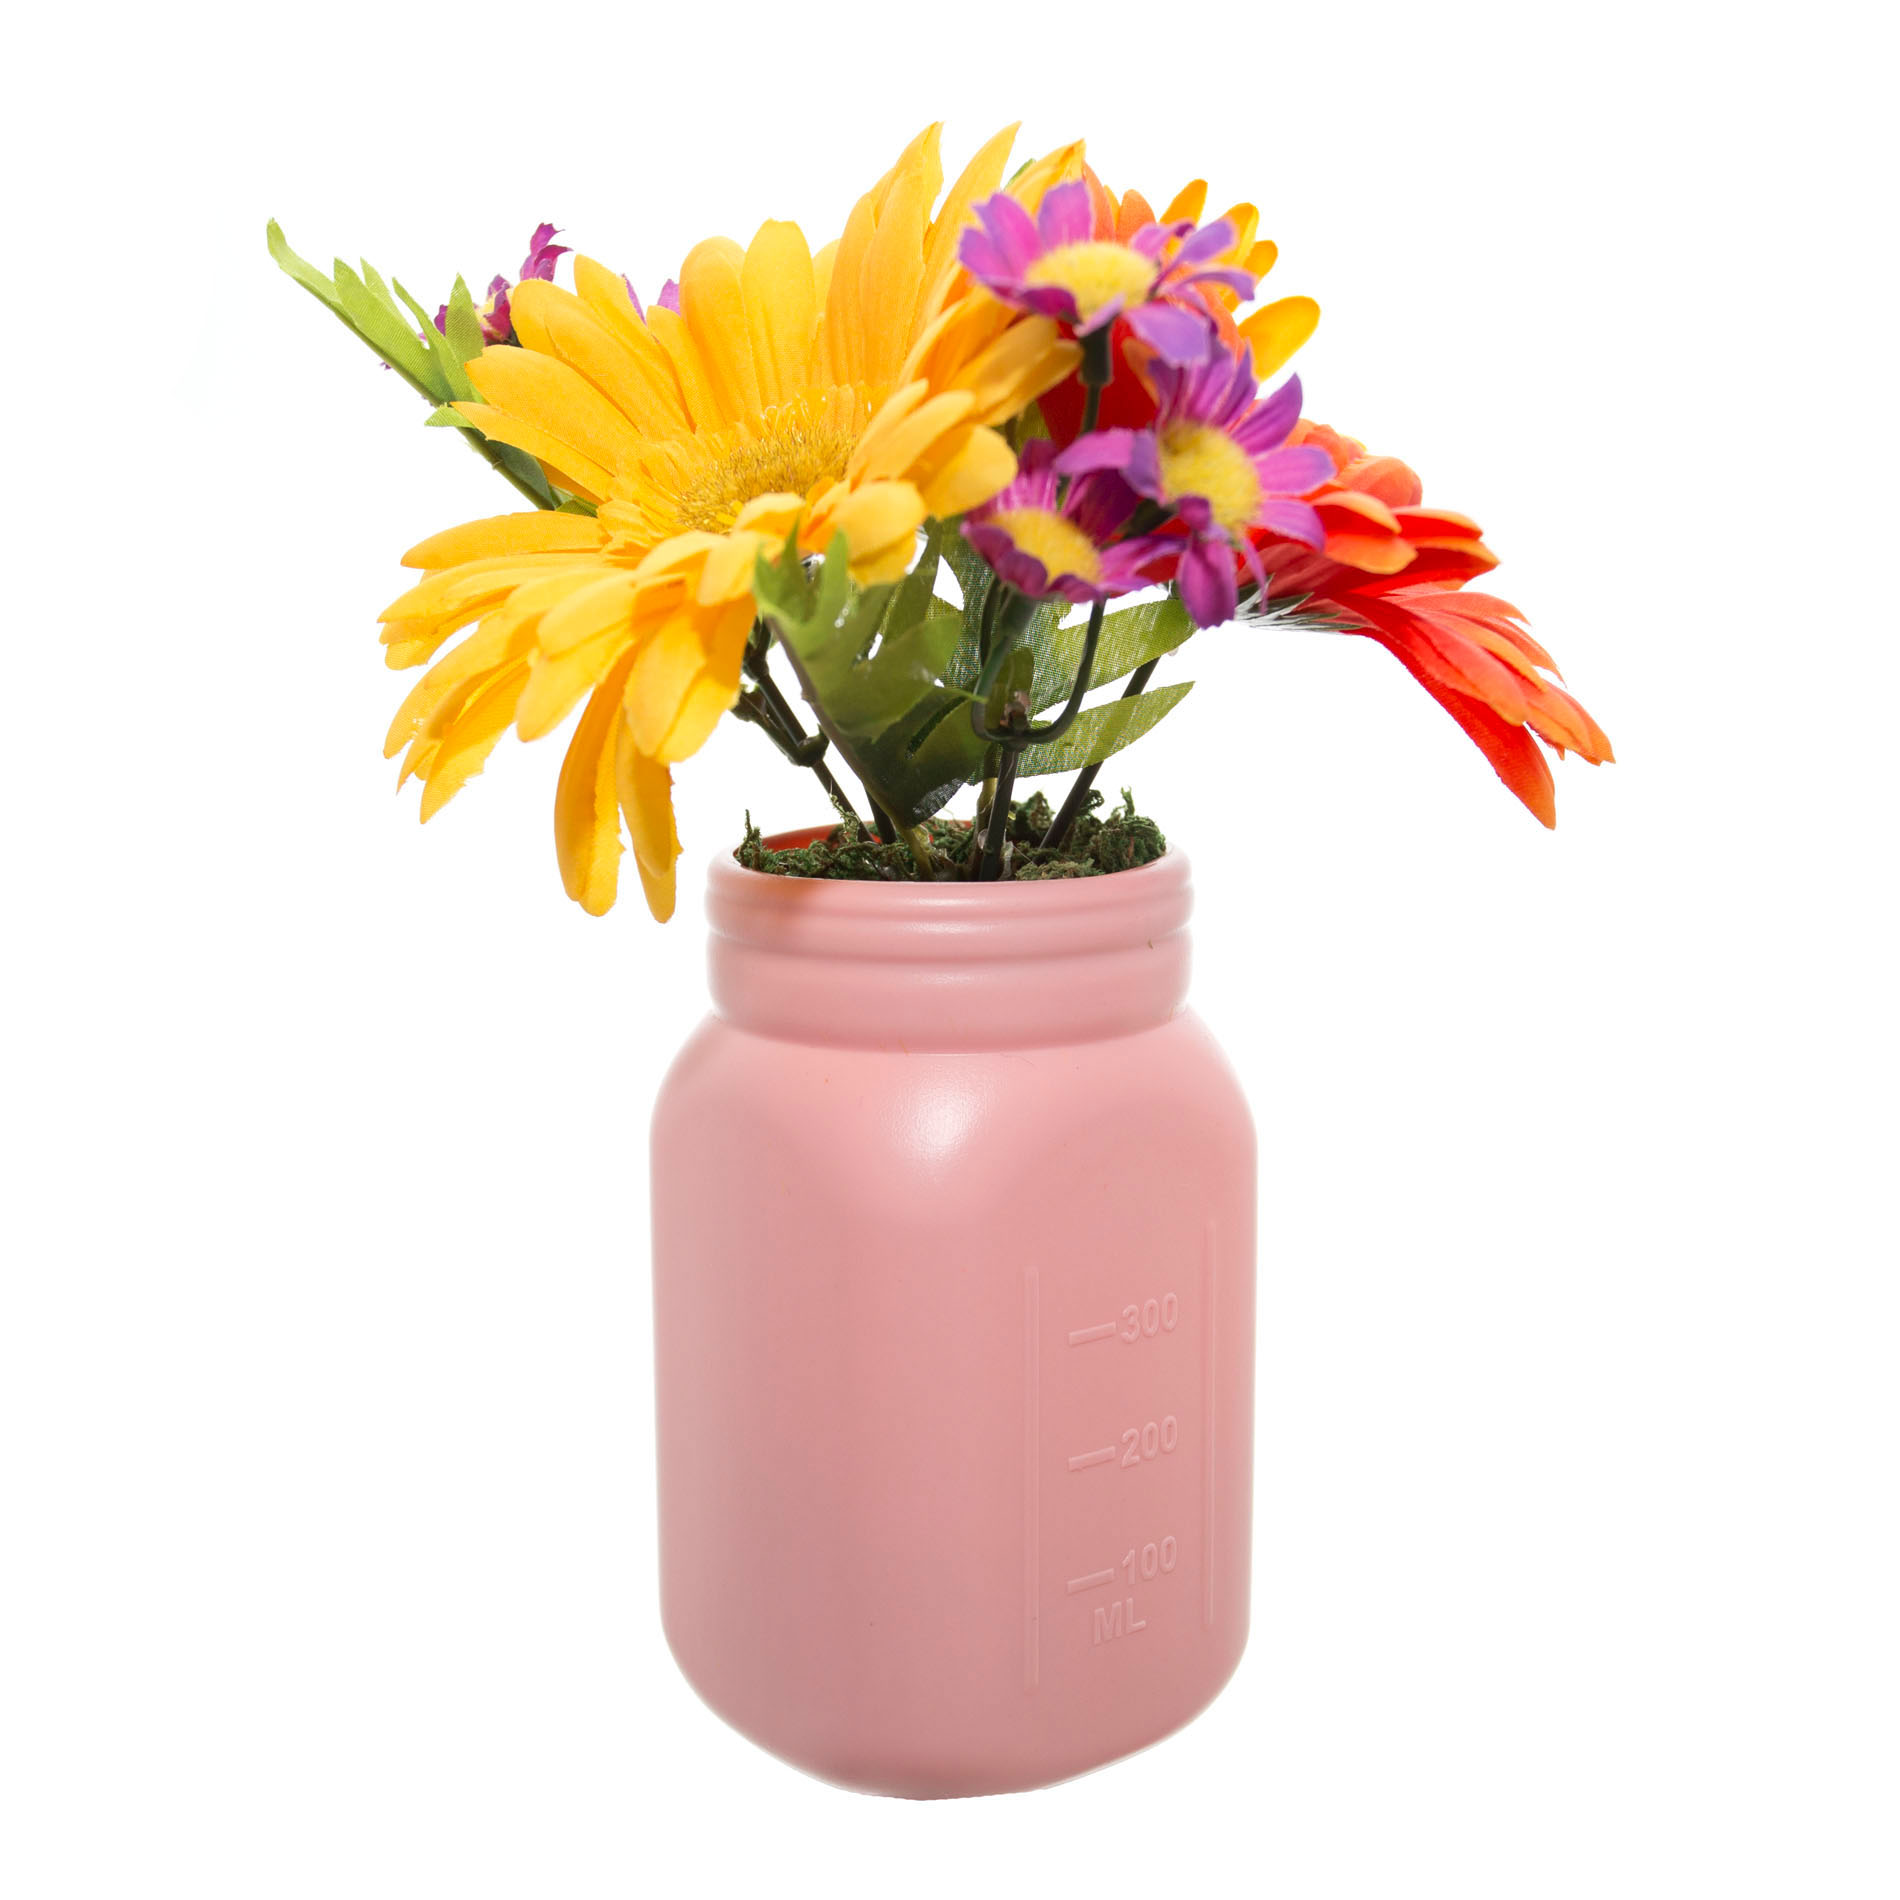 Simply Spring 8" Jar with Sunflower Plants